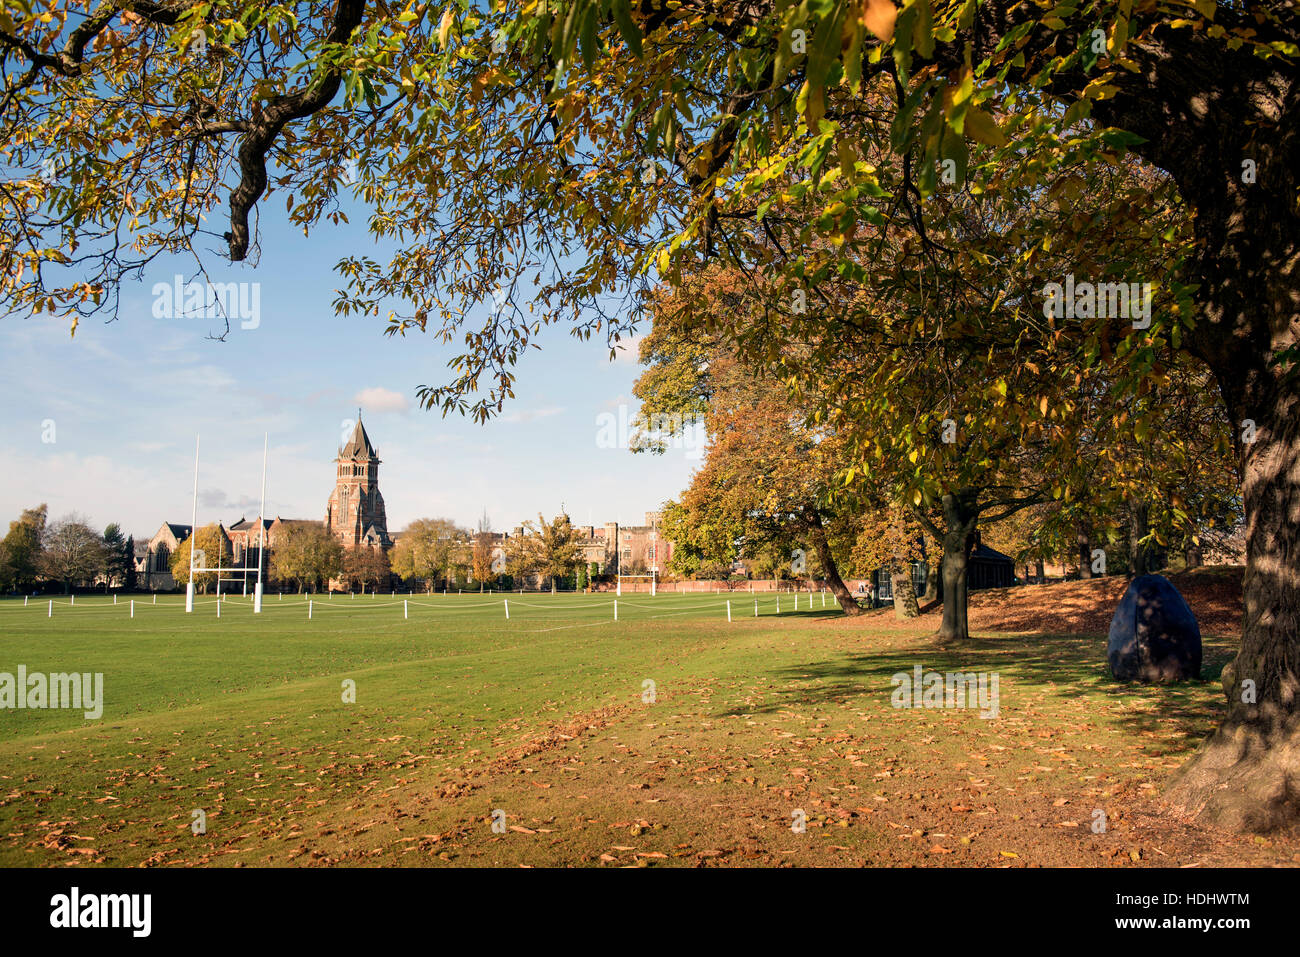 General view of Rugby School in Warwickshire, UK Stock Photo